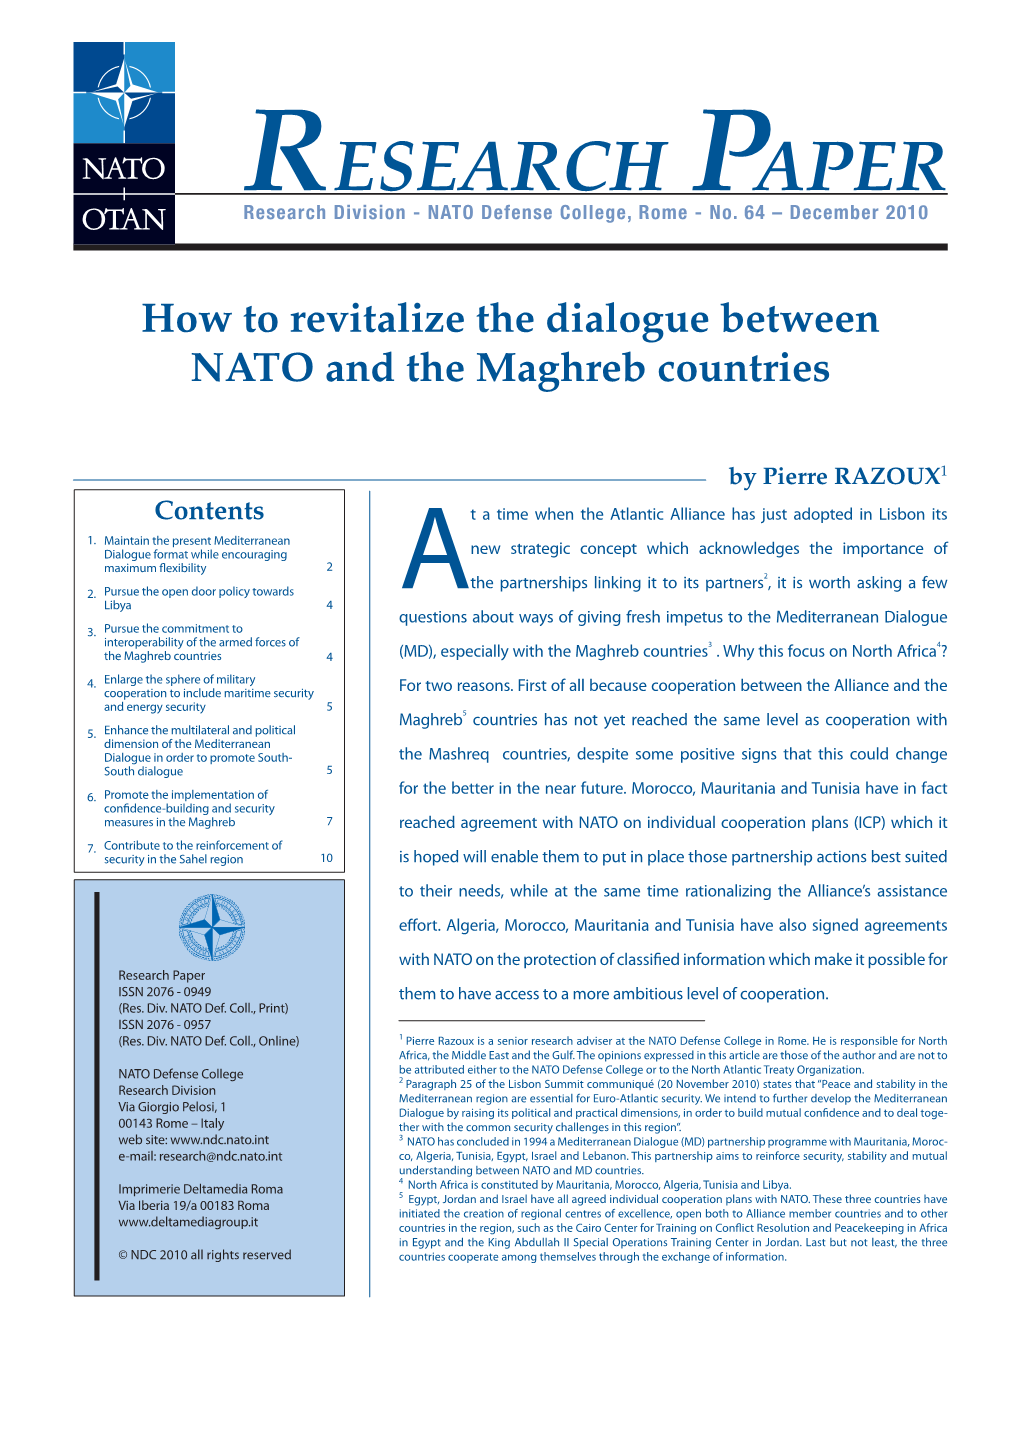 How to Revitalize the Dialogue Between NATO and the Maghreb Countries